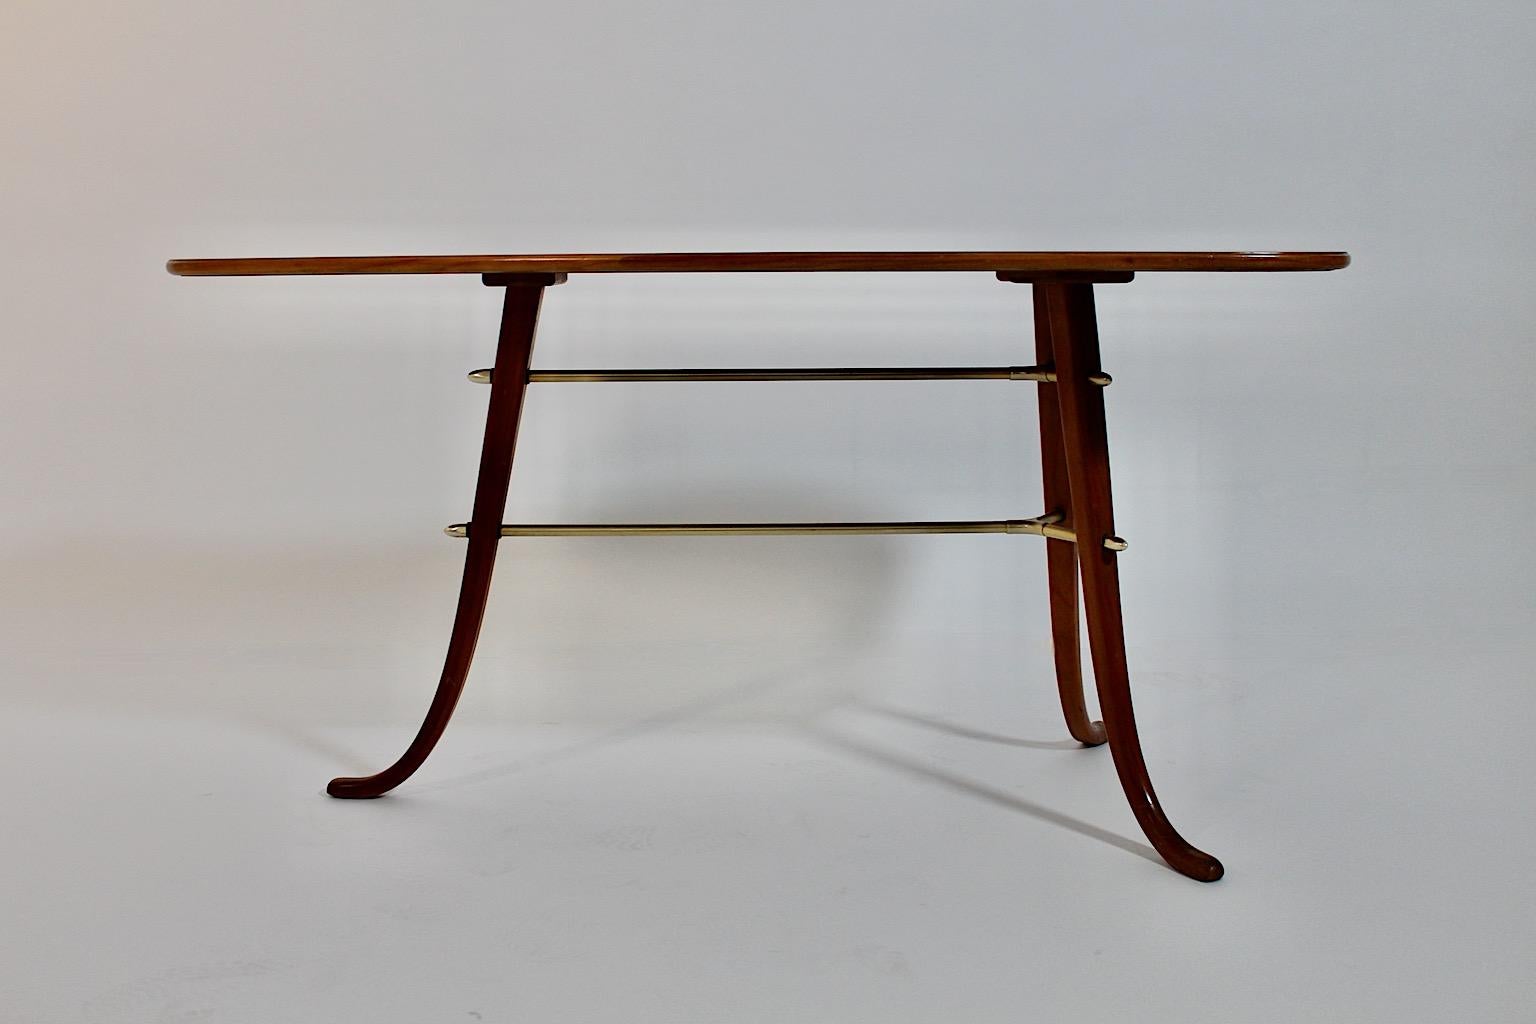 Modernist Mid-Century Modern vintage side table or coffee table from cherry wood and brass attributed to Josef Frank for Svenskt Tenn 1950s Sweden.
An absolutely stunning coffee table or side table from beautiful cherry wood and brass details in